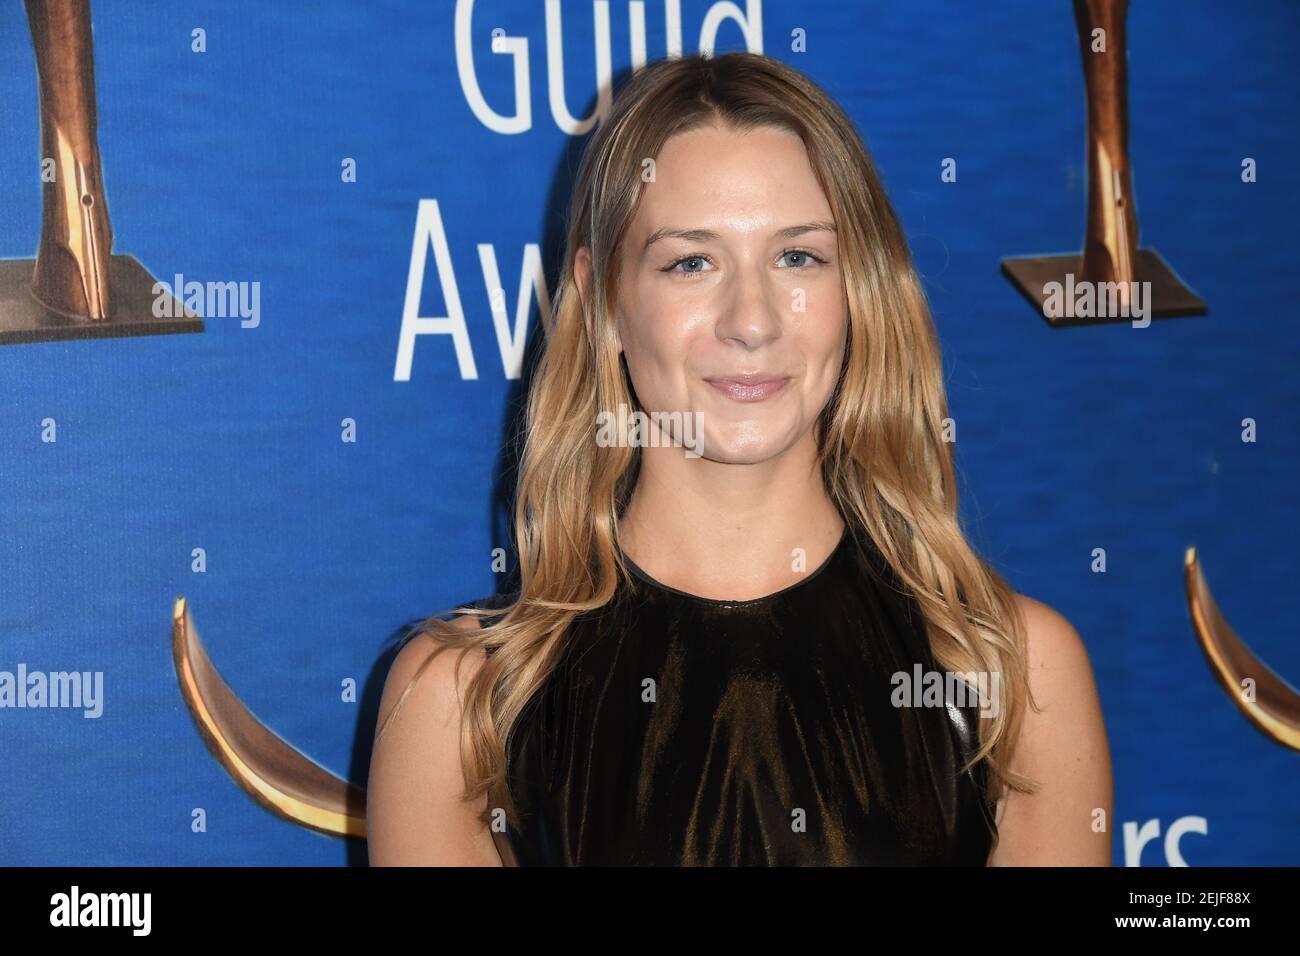 https://c8.alamy.com/comp/2EJF88X/alessandra-dimona-walks-the-carpet-at-the-2020-writers-guild-awards-held-at-the-beverly-hilton-hotel-on-february-1-2020-in-beverly-hills-ca-usa-photo-by-sthanlee-b-miradorsipa-usa-2EJF88X.jpg